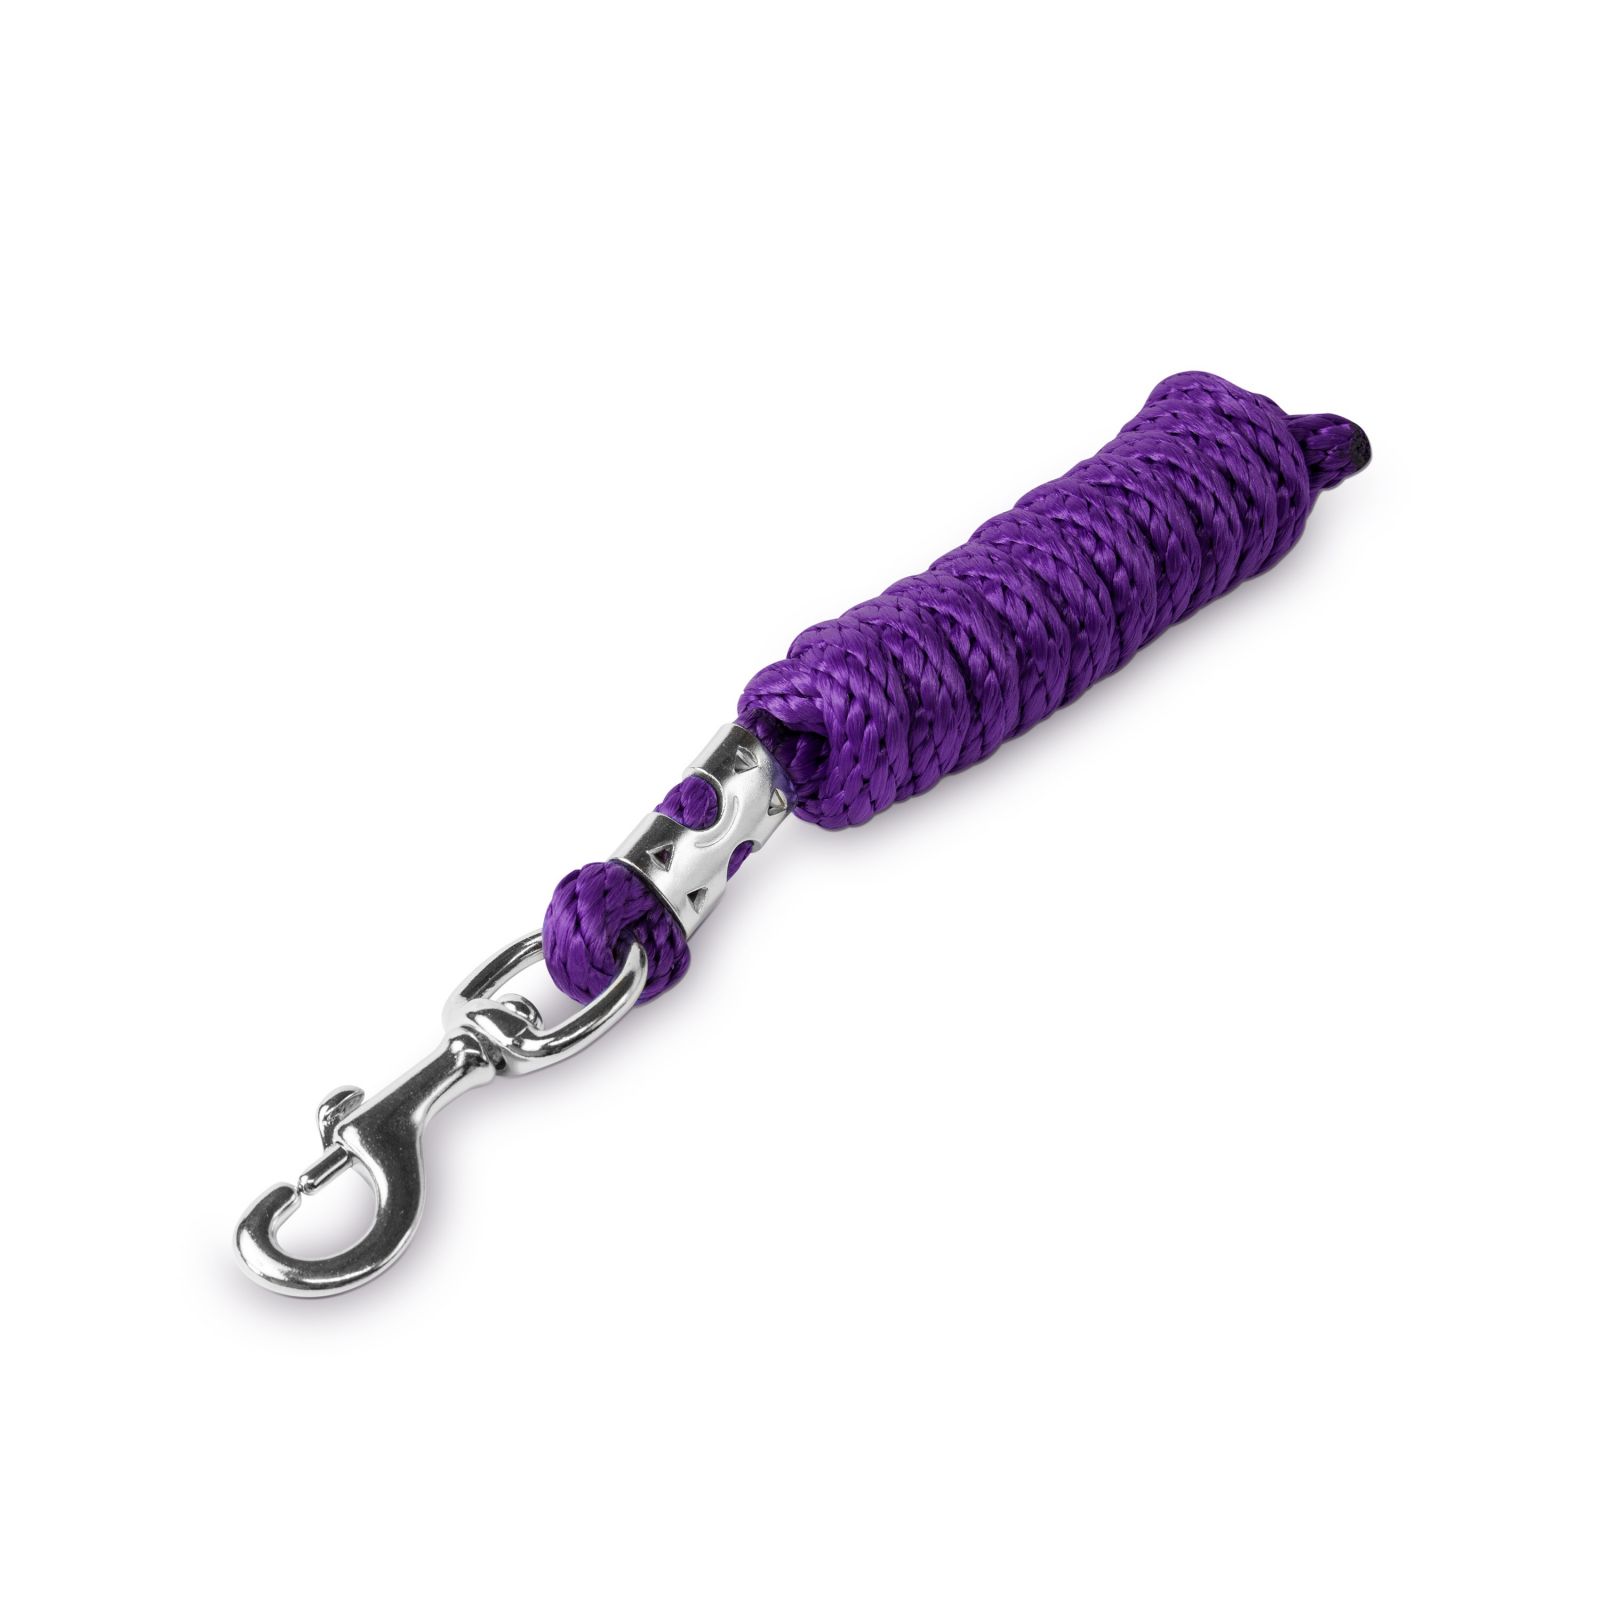 KM 6ft Poly Lead Rope Nickel Clip